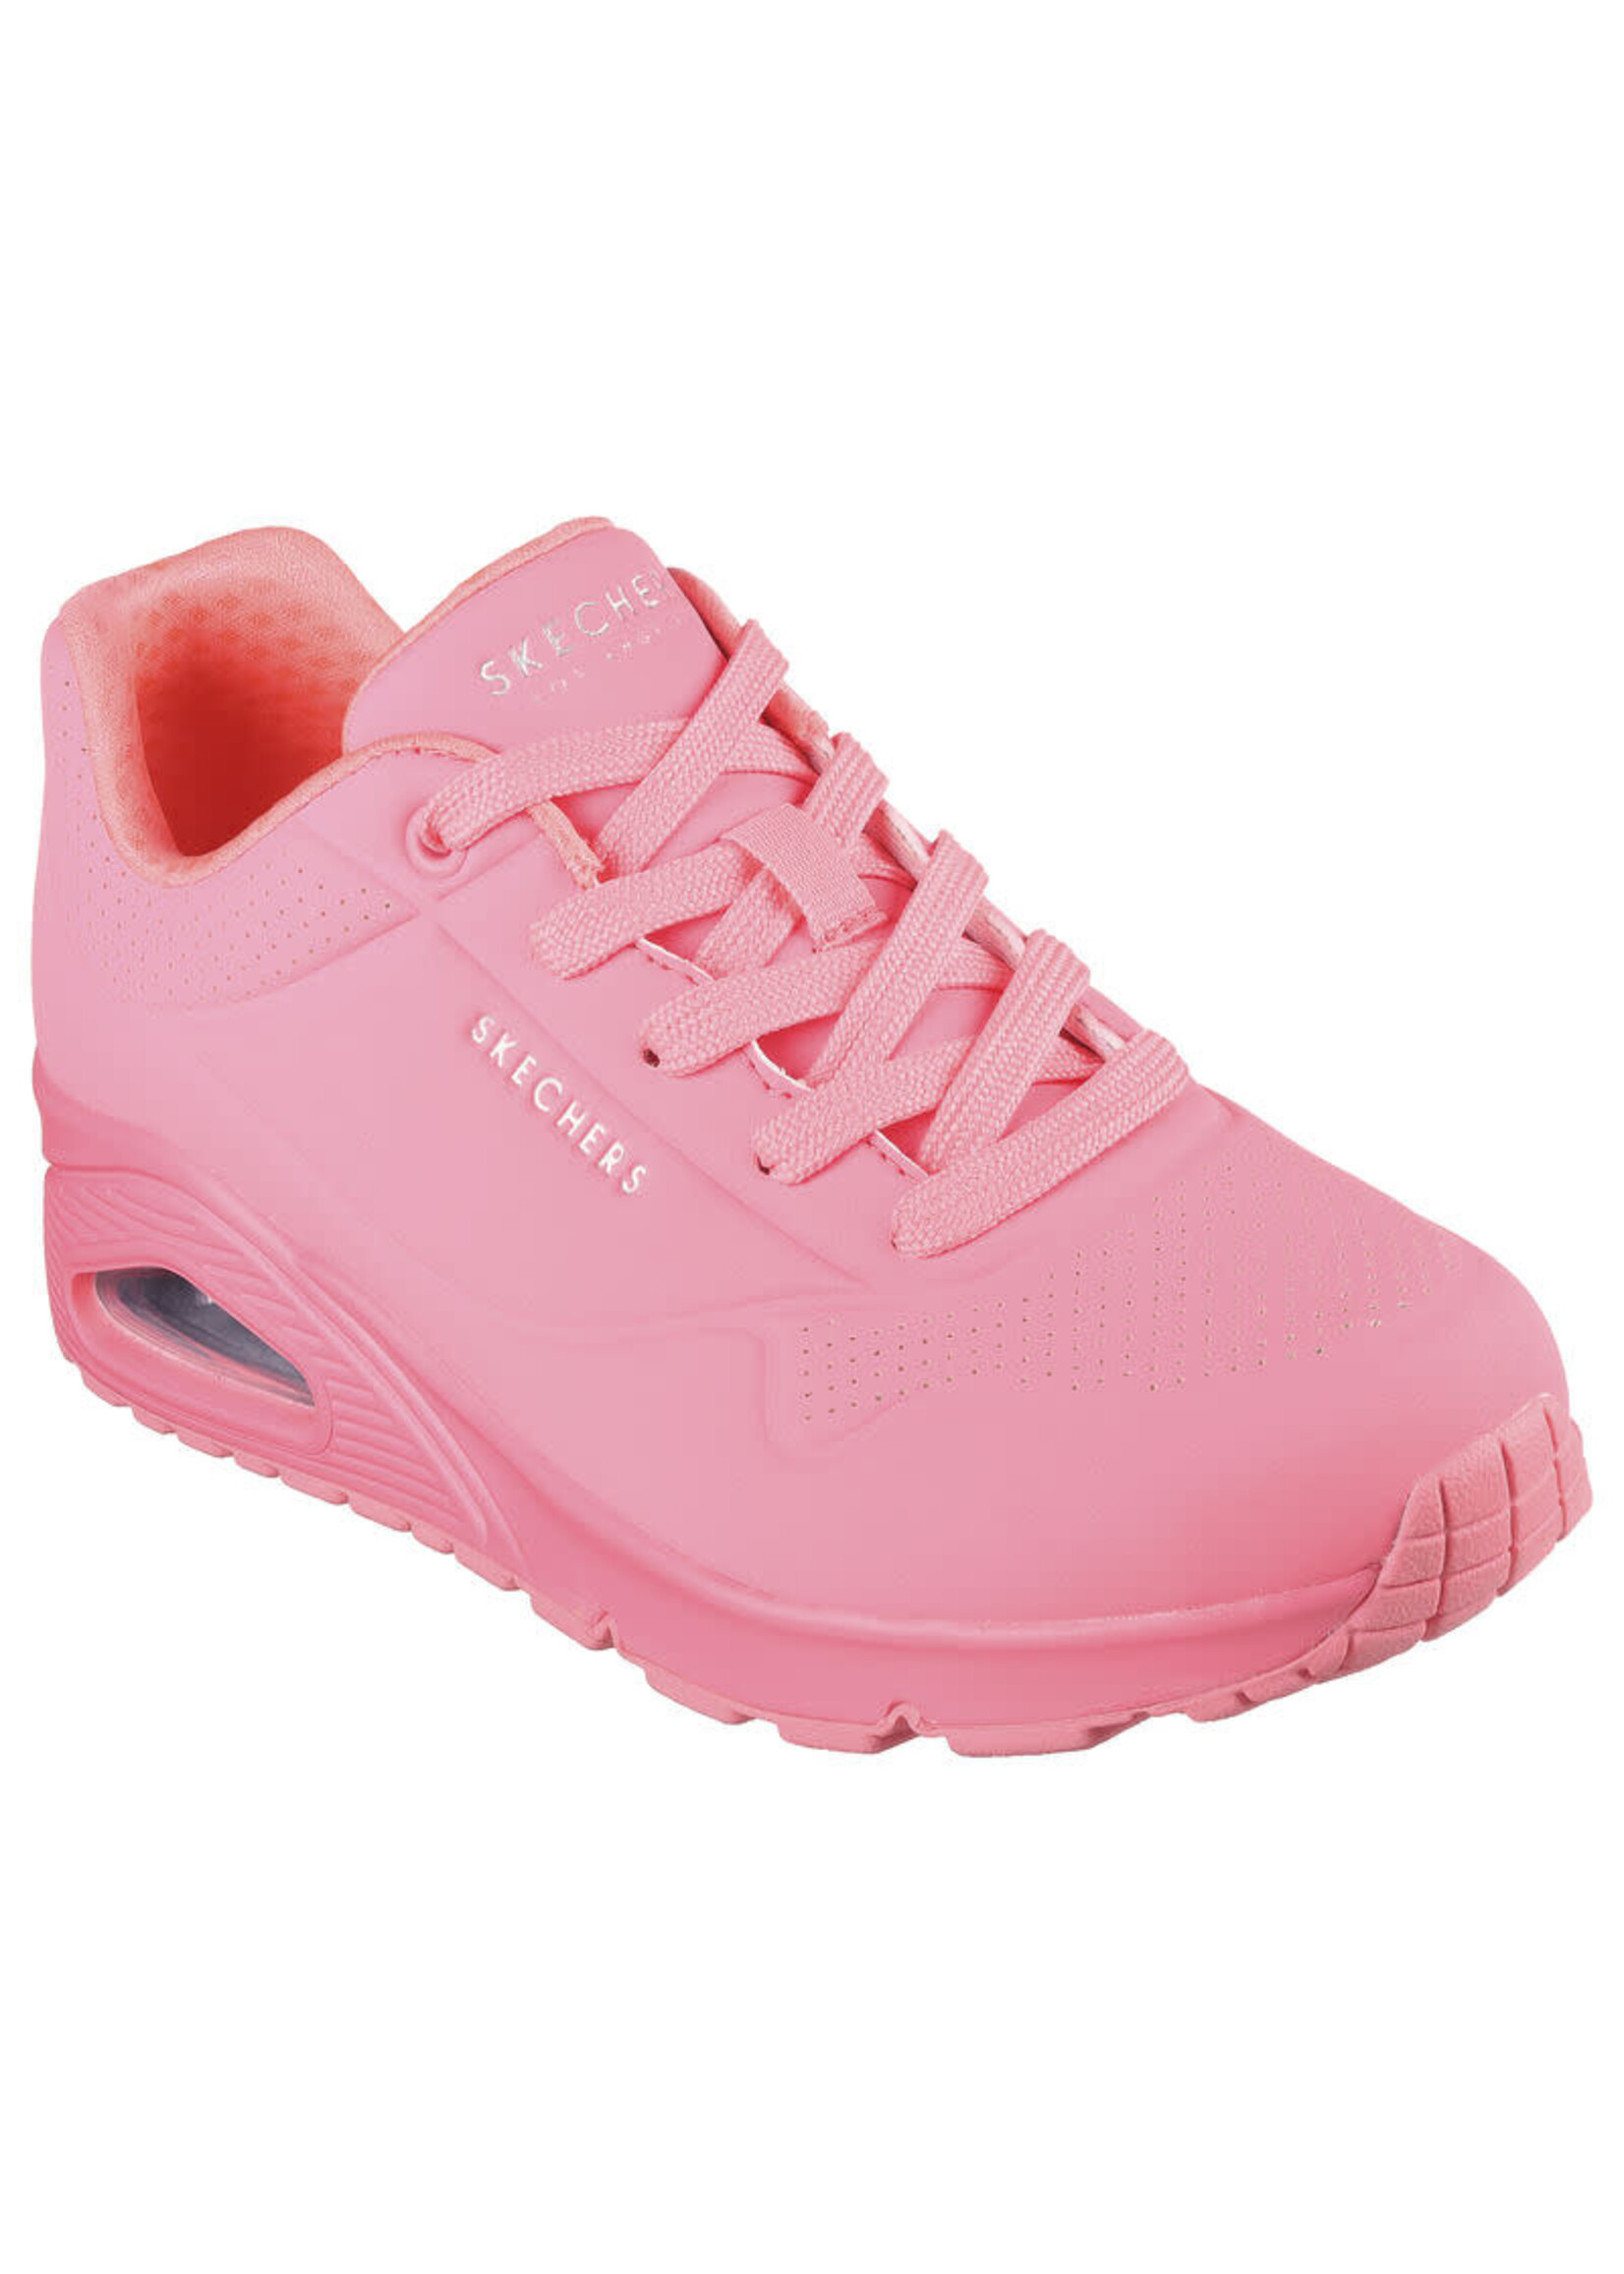 Skechers Women's Uno Stand on Air Coral Pink 73690/CRL